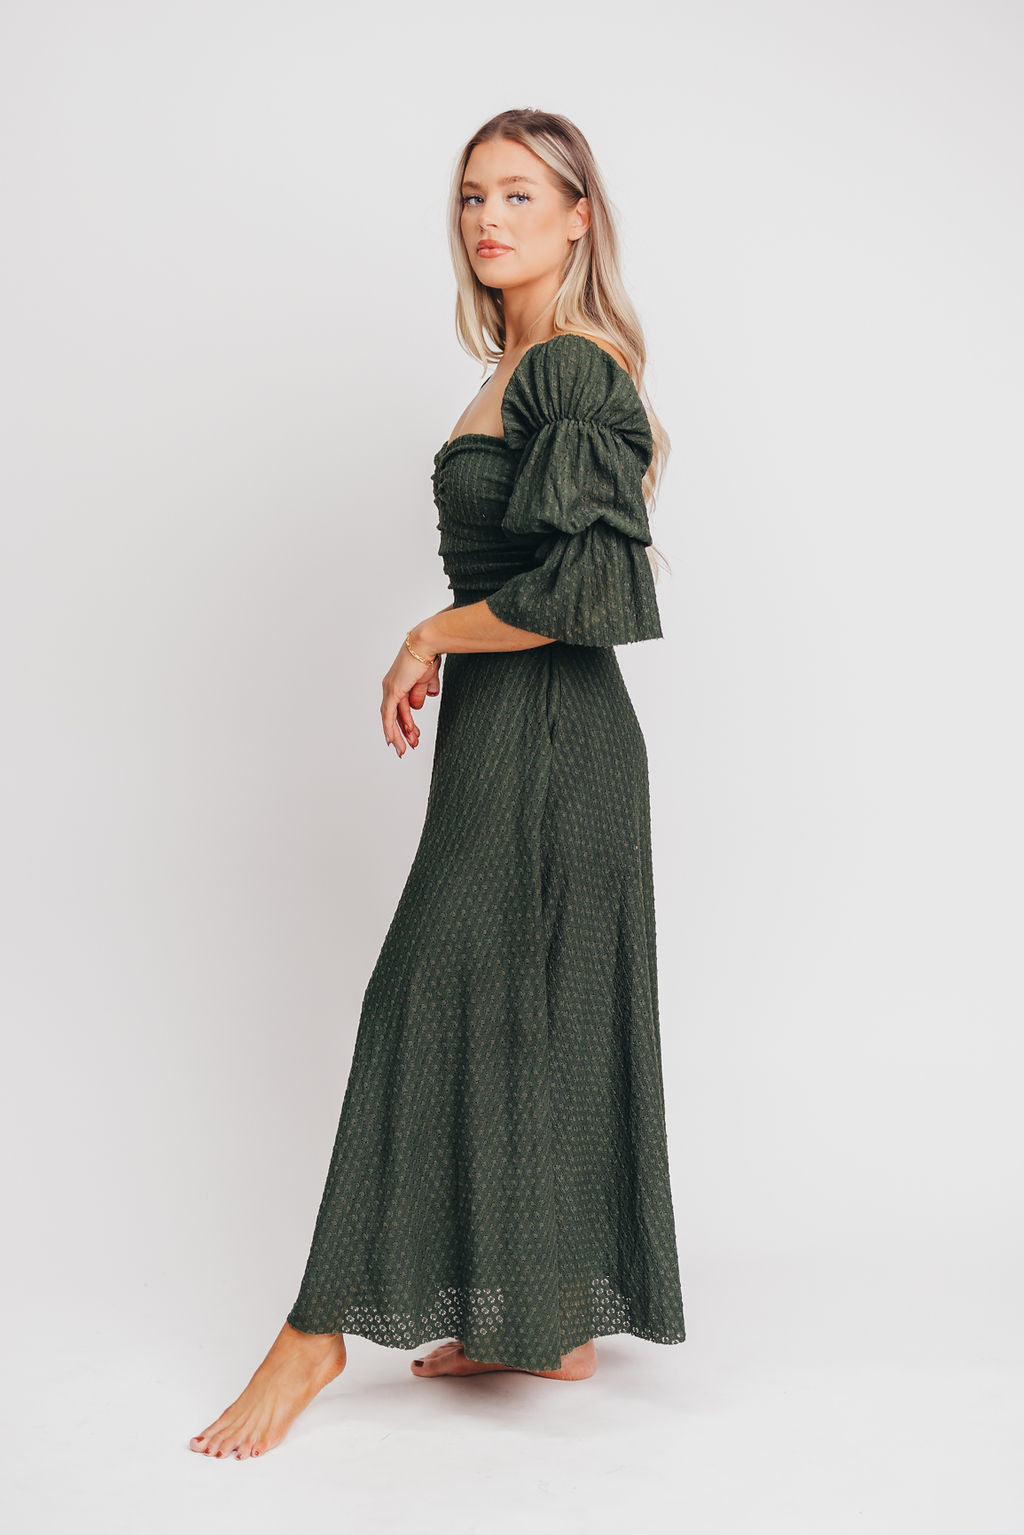 Corrine Tiered Sleeve Maxi Dress with Pockets in Hunter Green - Bump Friendly *Pre-Order Dec 7* Fasting Selling Dress of the Season - Last Restock